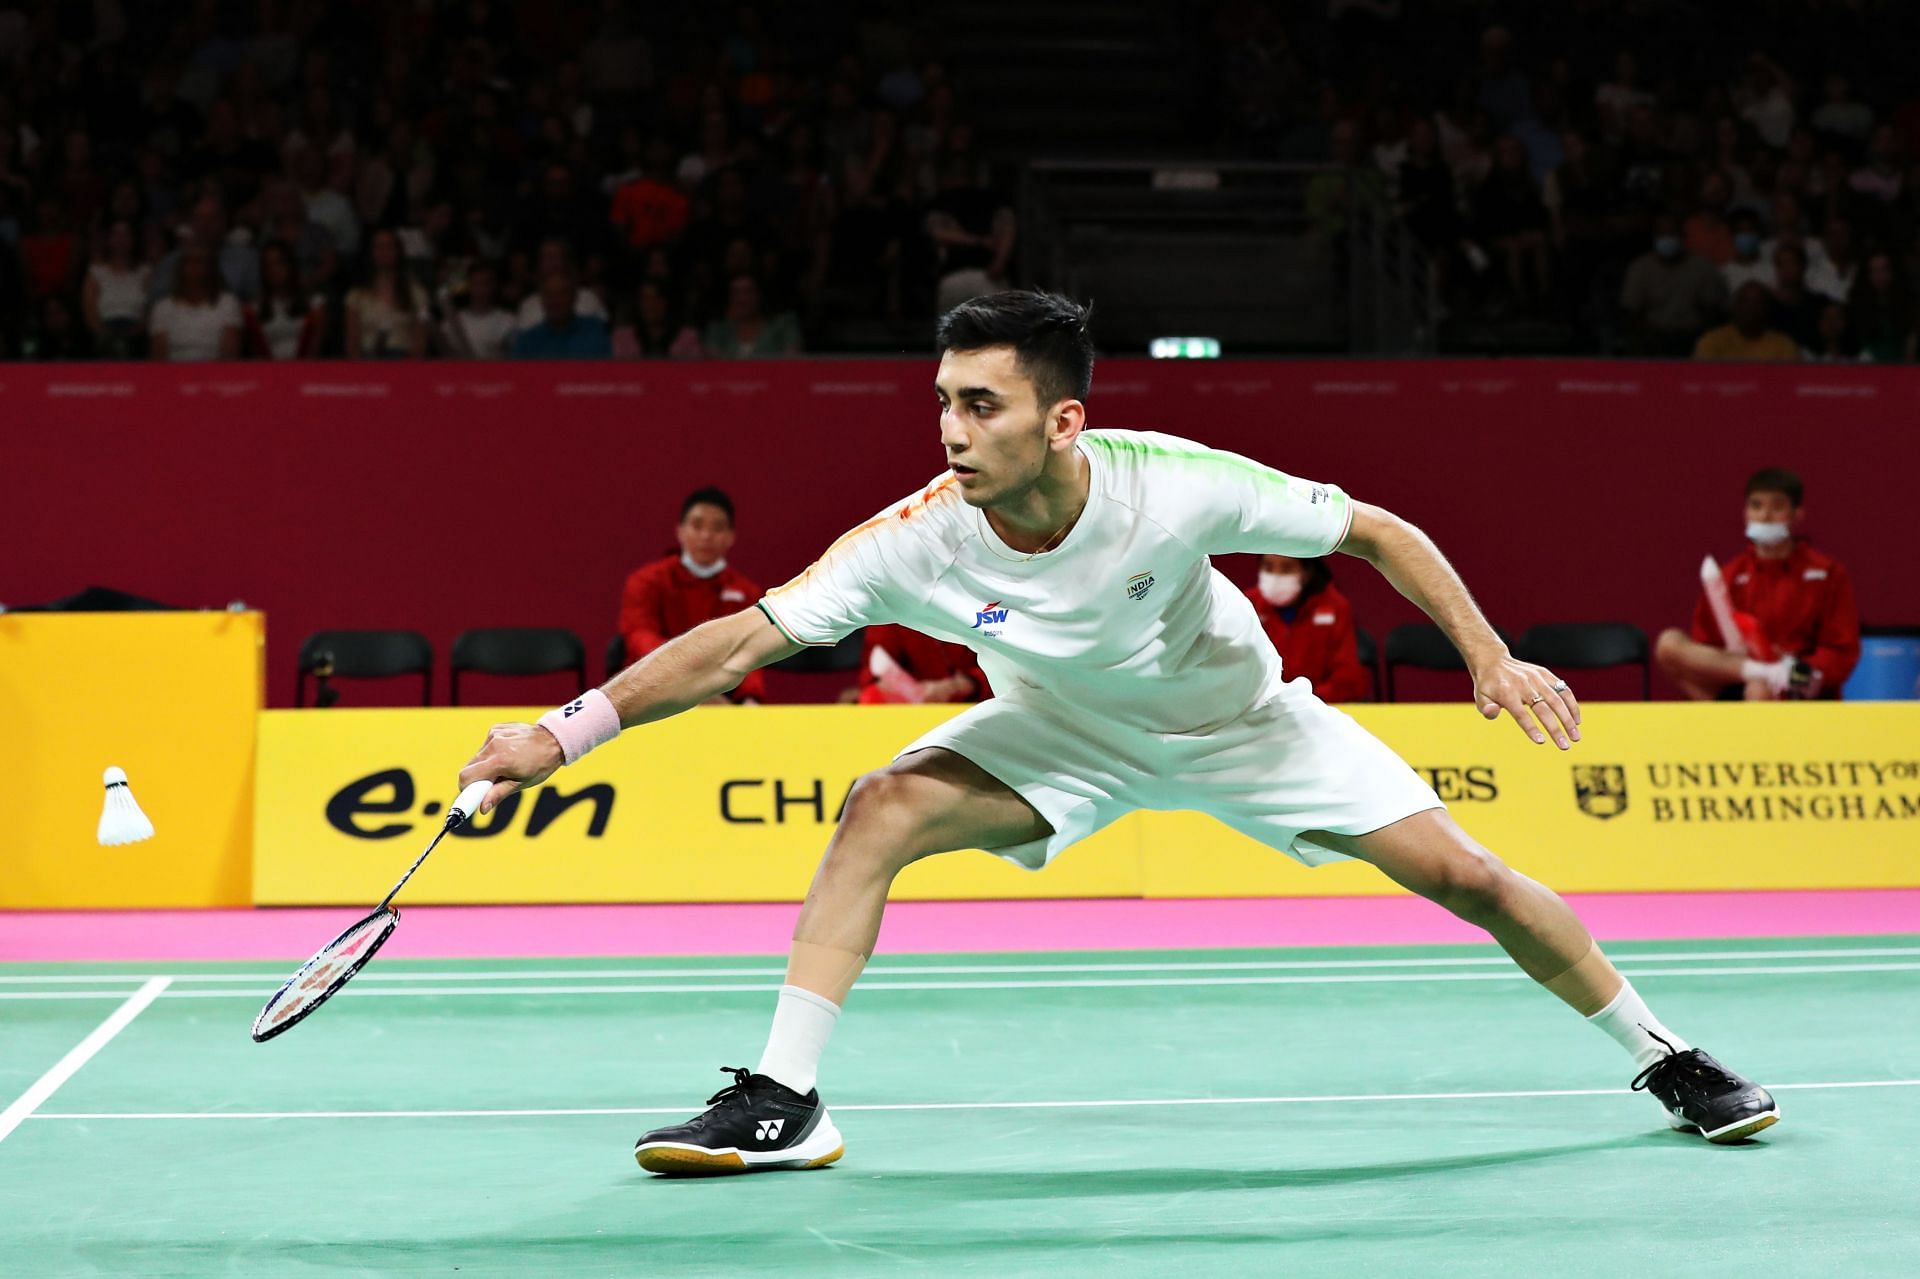 Canada Open 2023 Lakshya Sen vs Ygor Coelho, head-to-head, prediction, where to watch and live streaming details